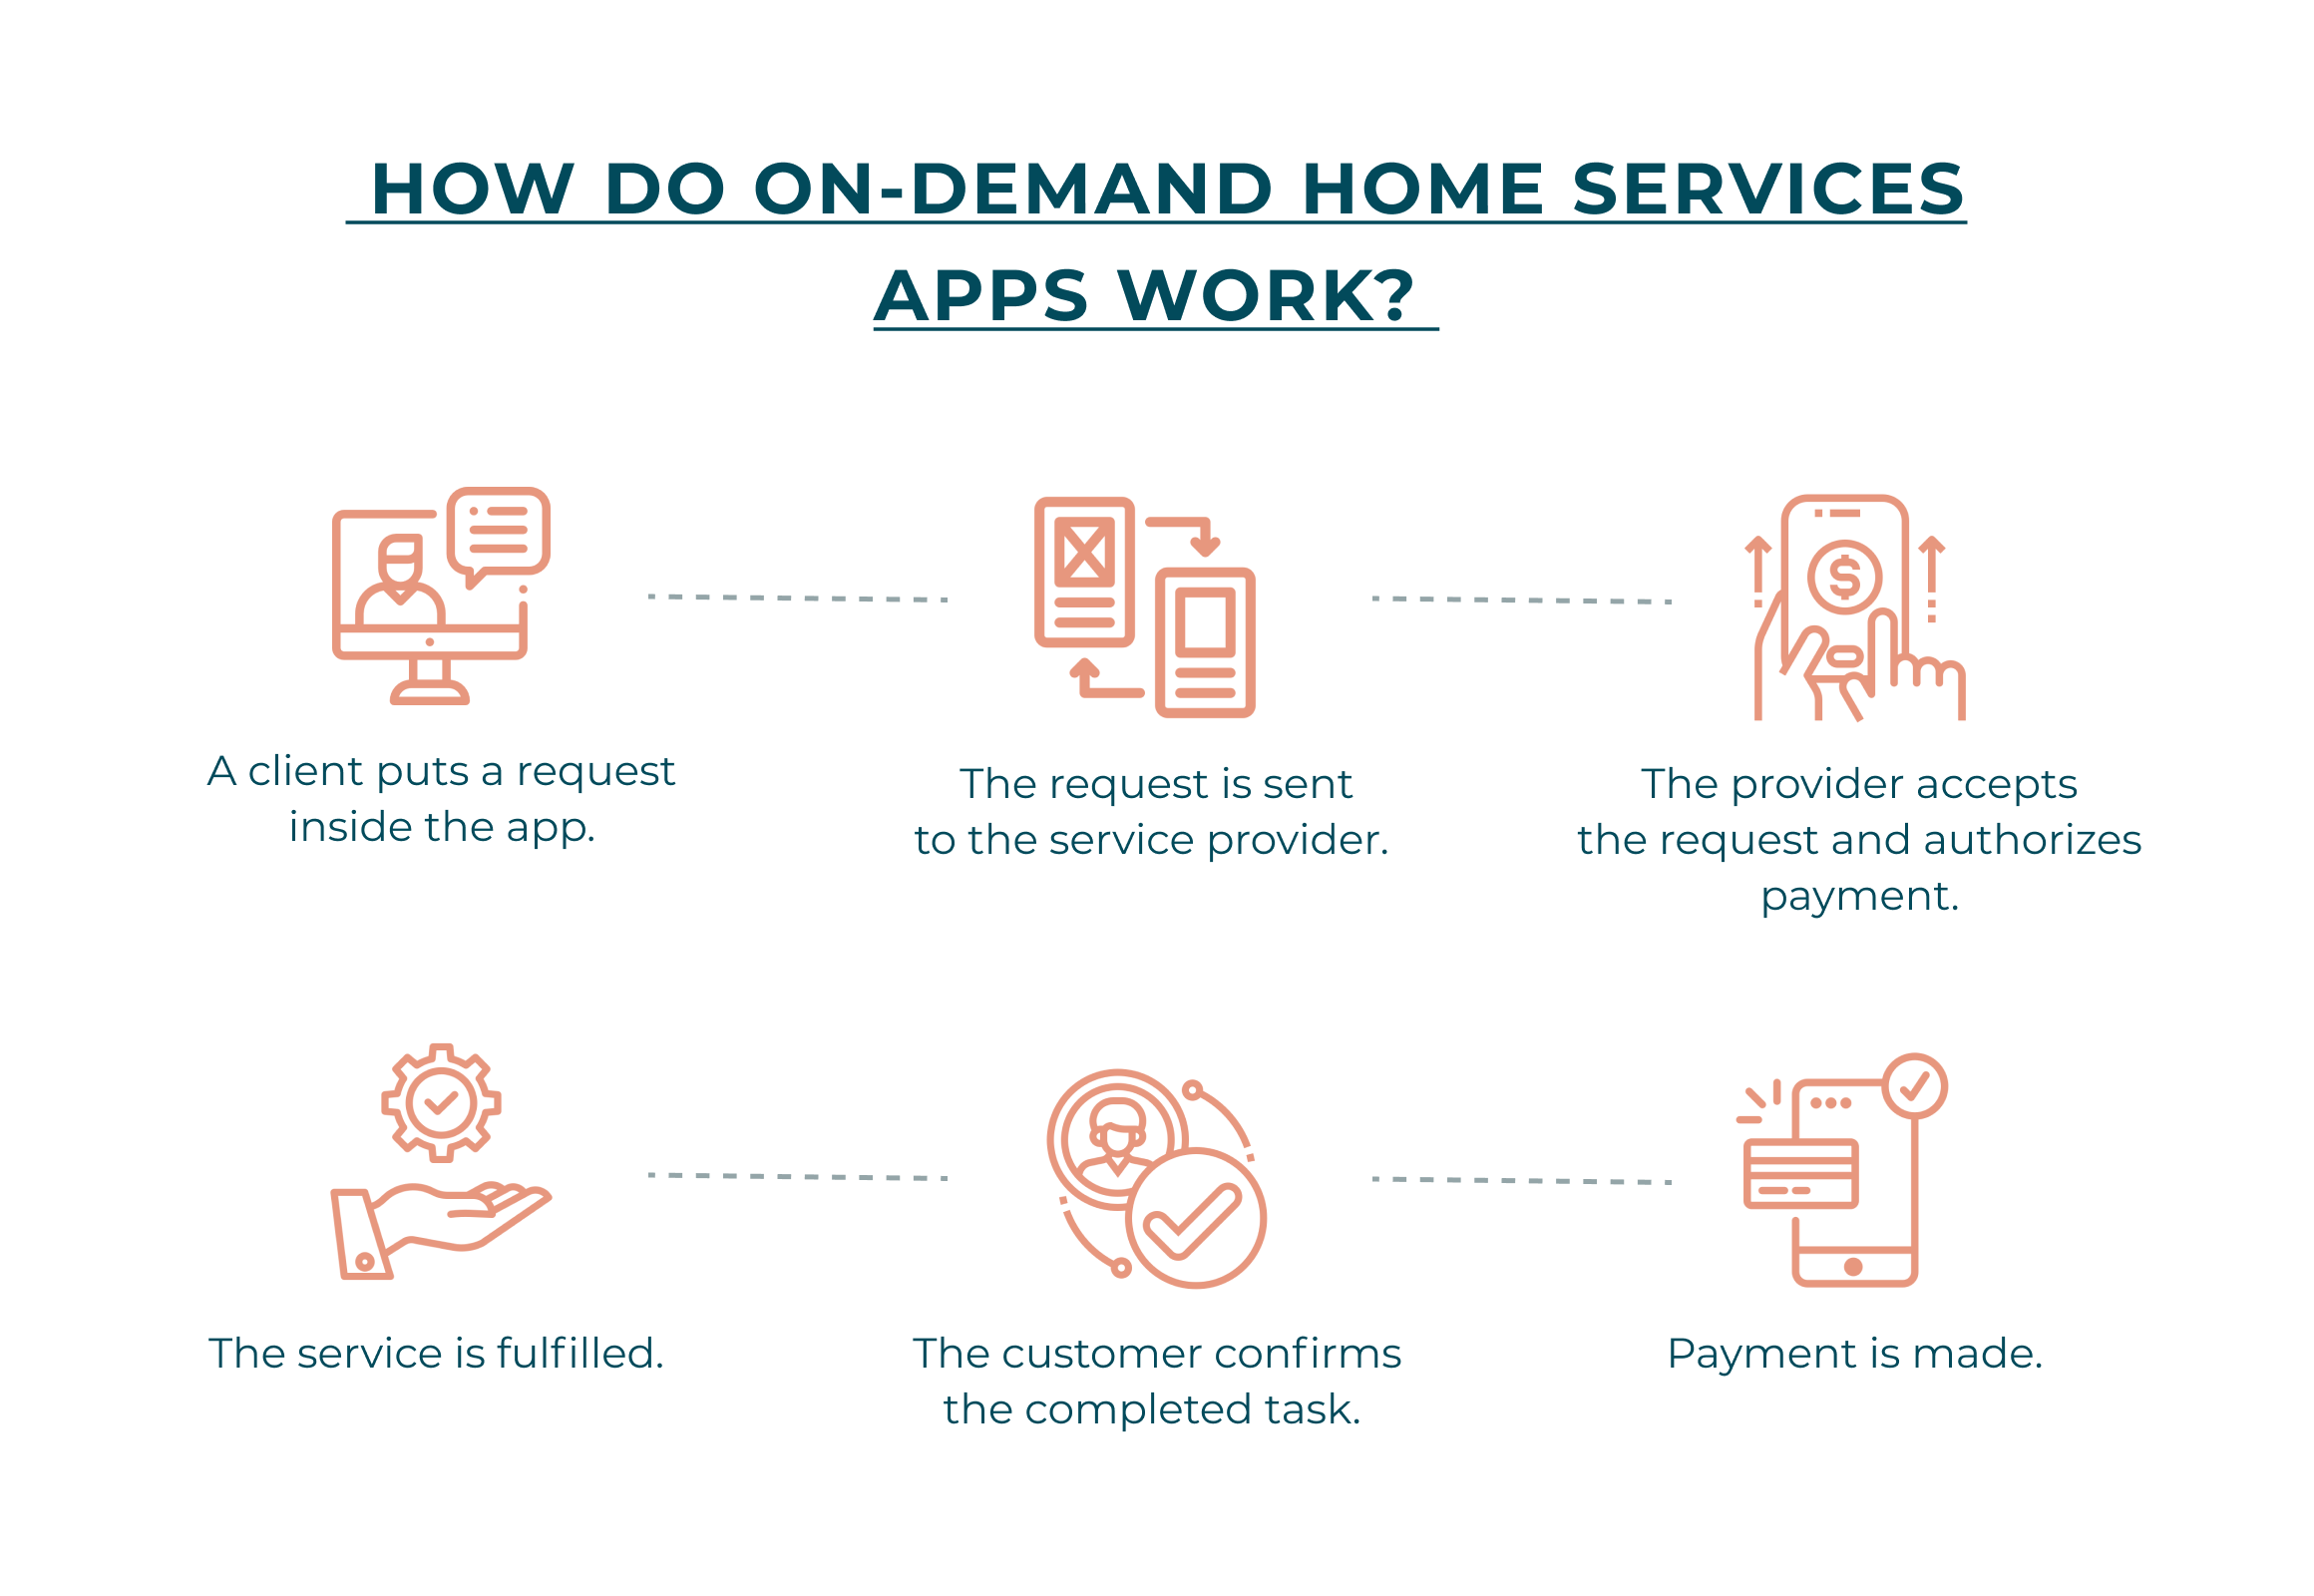 How do on-demand services apps work